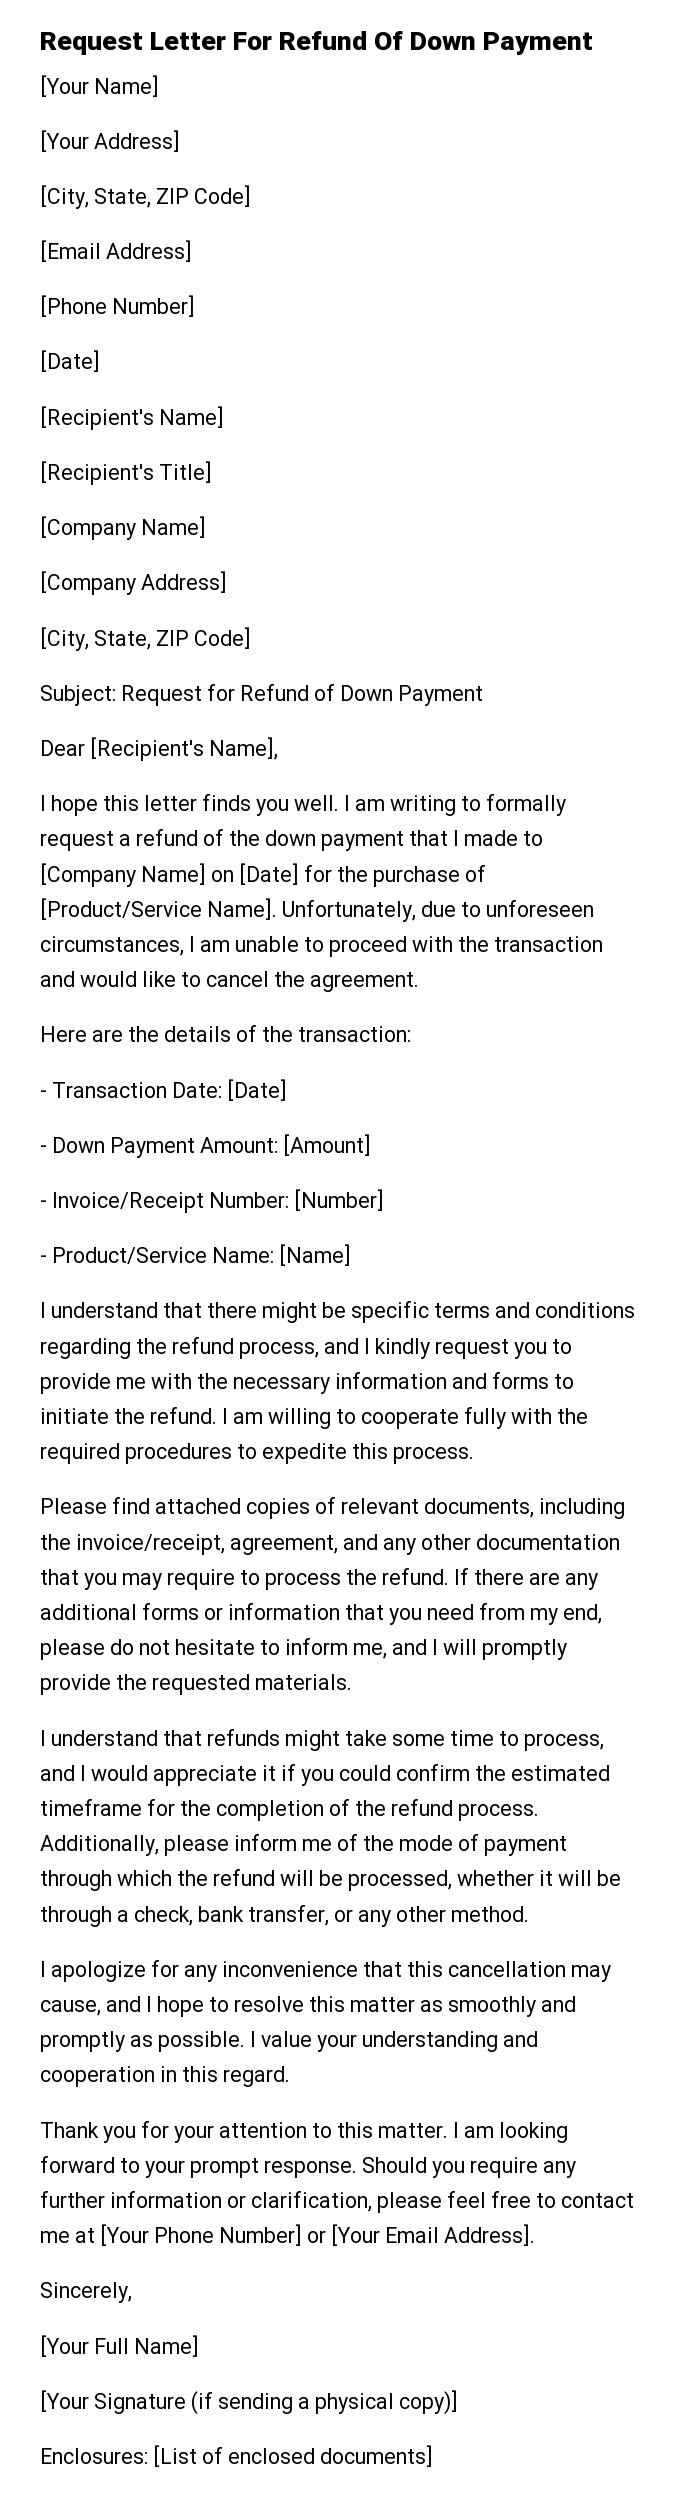 Request Letter For Refund Of Down Payment